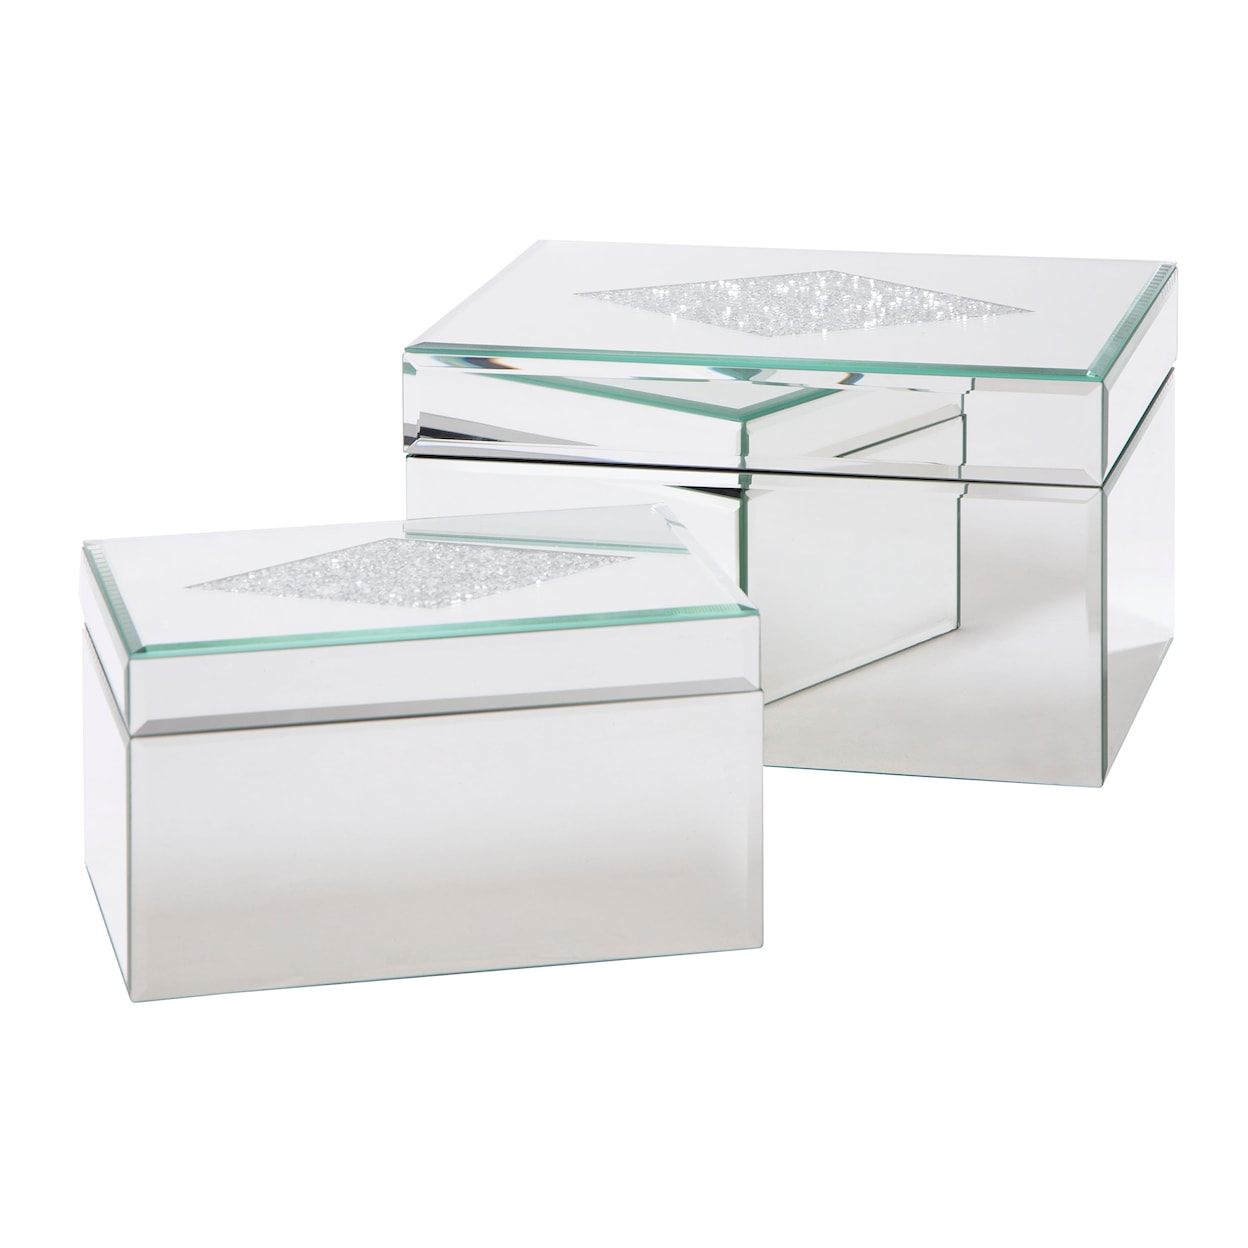 StyleLine Accents Charline Box (Set of 2)